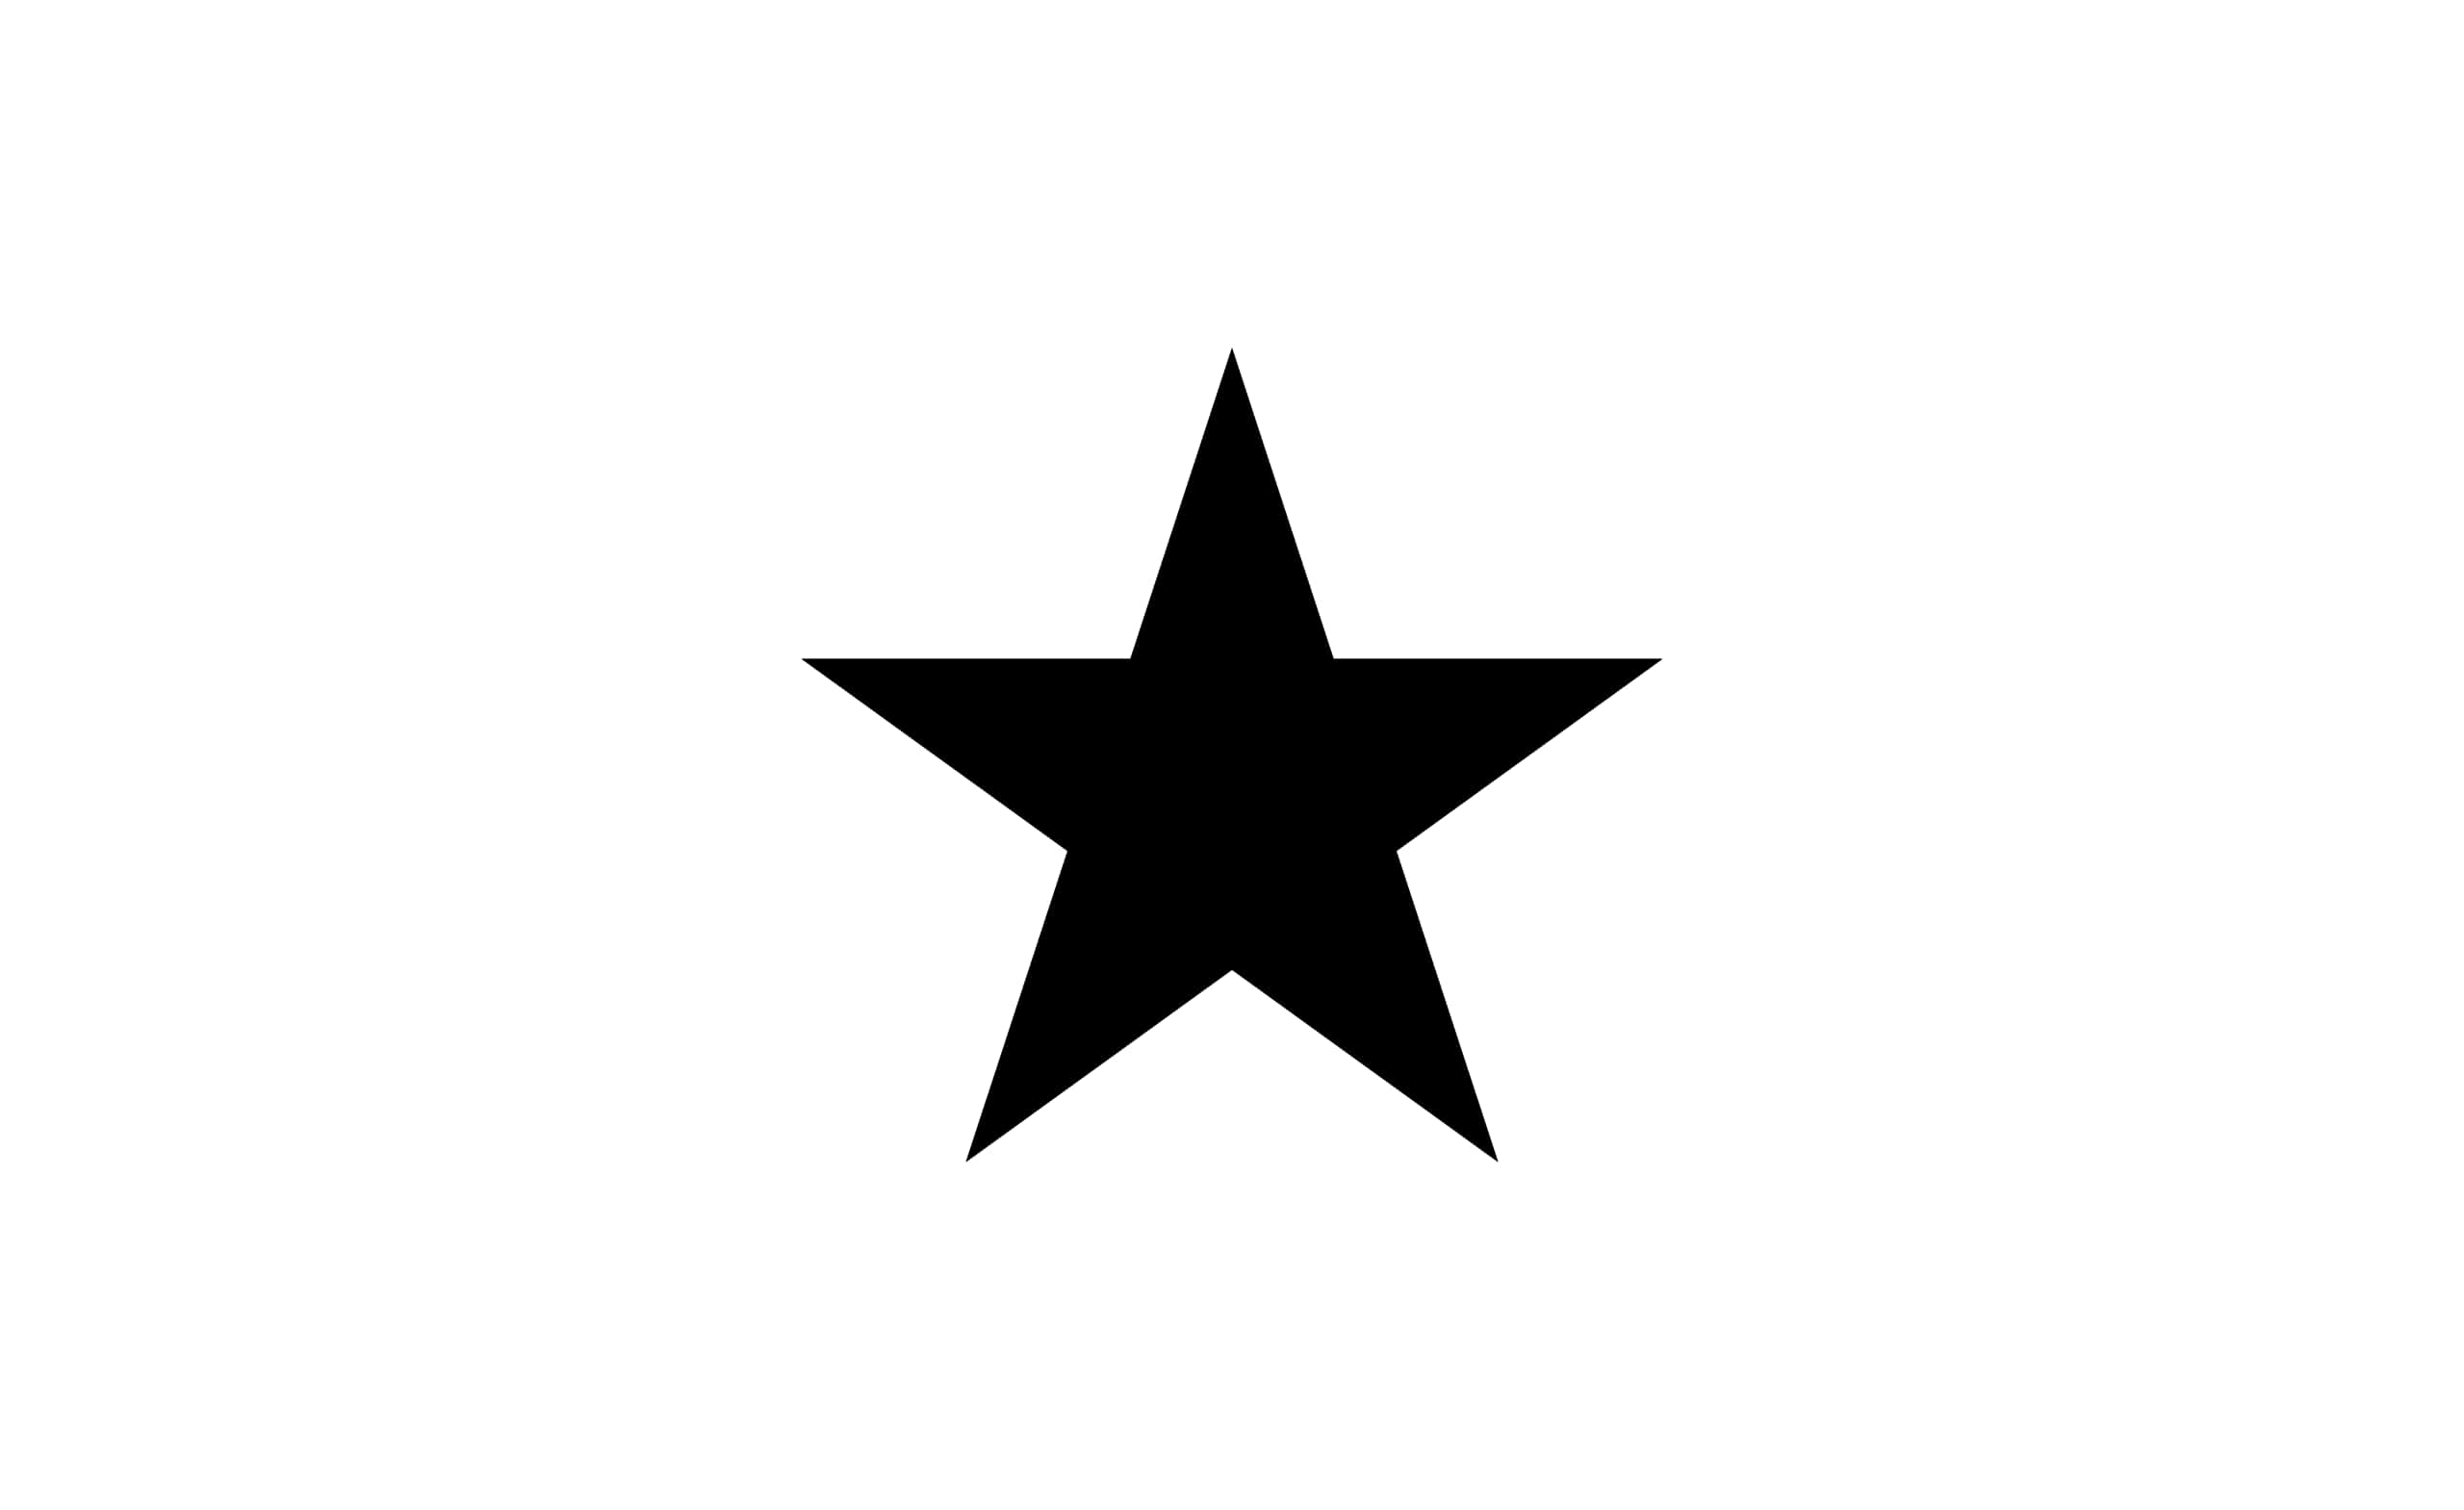 a black star is shown on a white background